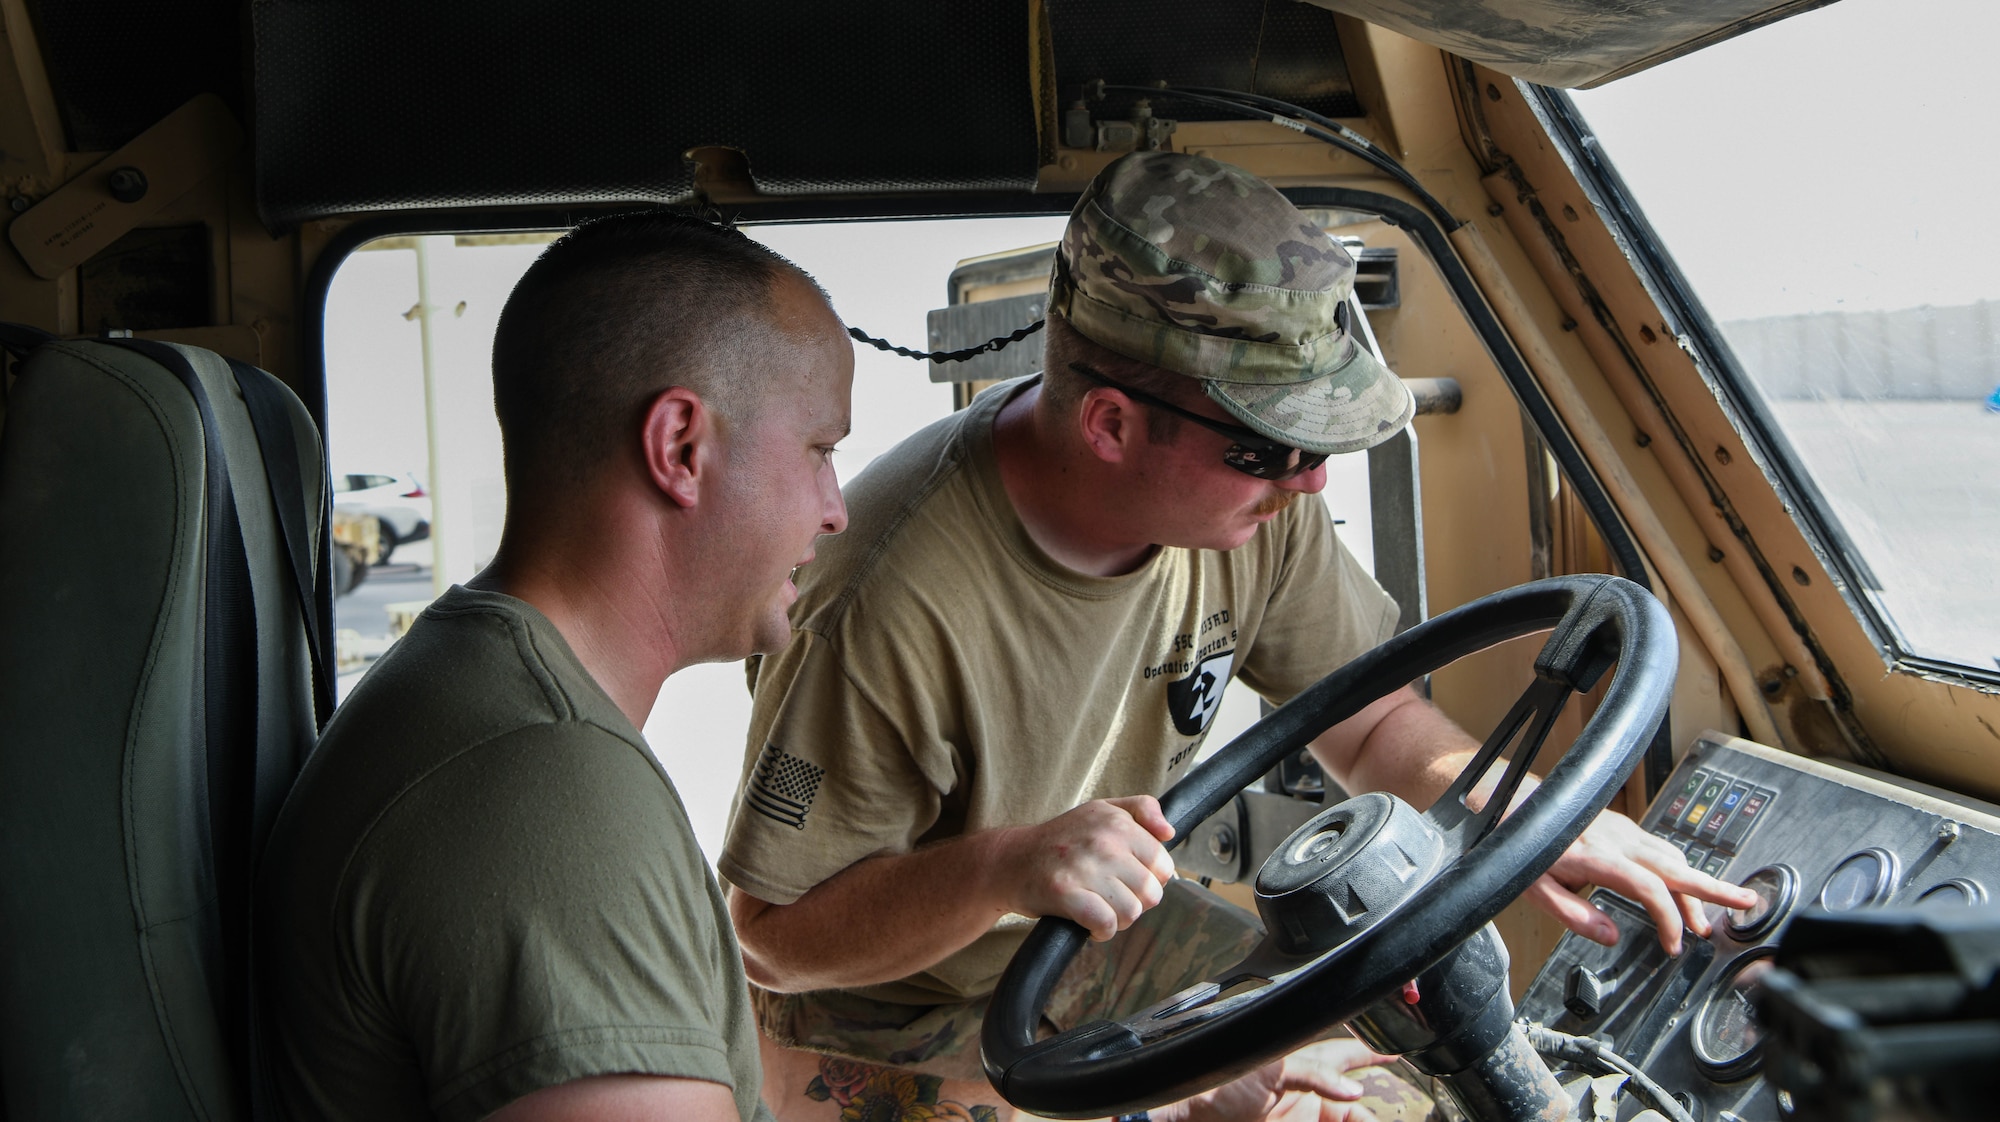 Army Specialist David Chaffin, instructor for the 133rd Battalion, shows Air Force Senior Airman Aiden Penrod, 380th Expeditionary Logistics Readiness Squadron ground transportation apprentice, the instrument panel of the M1075 Palletized Load System, July 22, 2020 at Al Dhafra Air Base, United Arab Emirates.